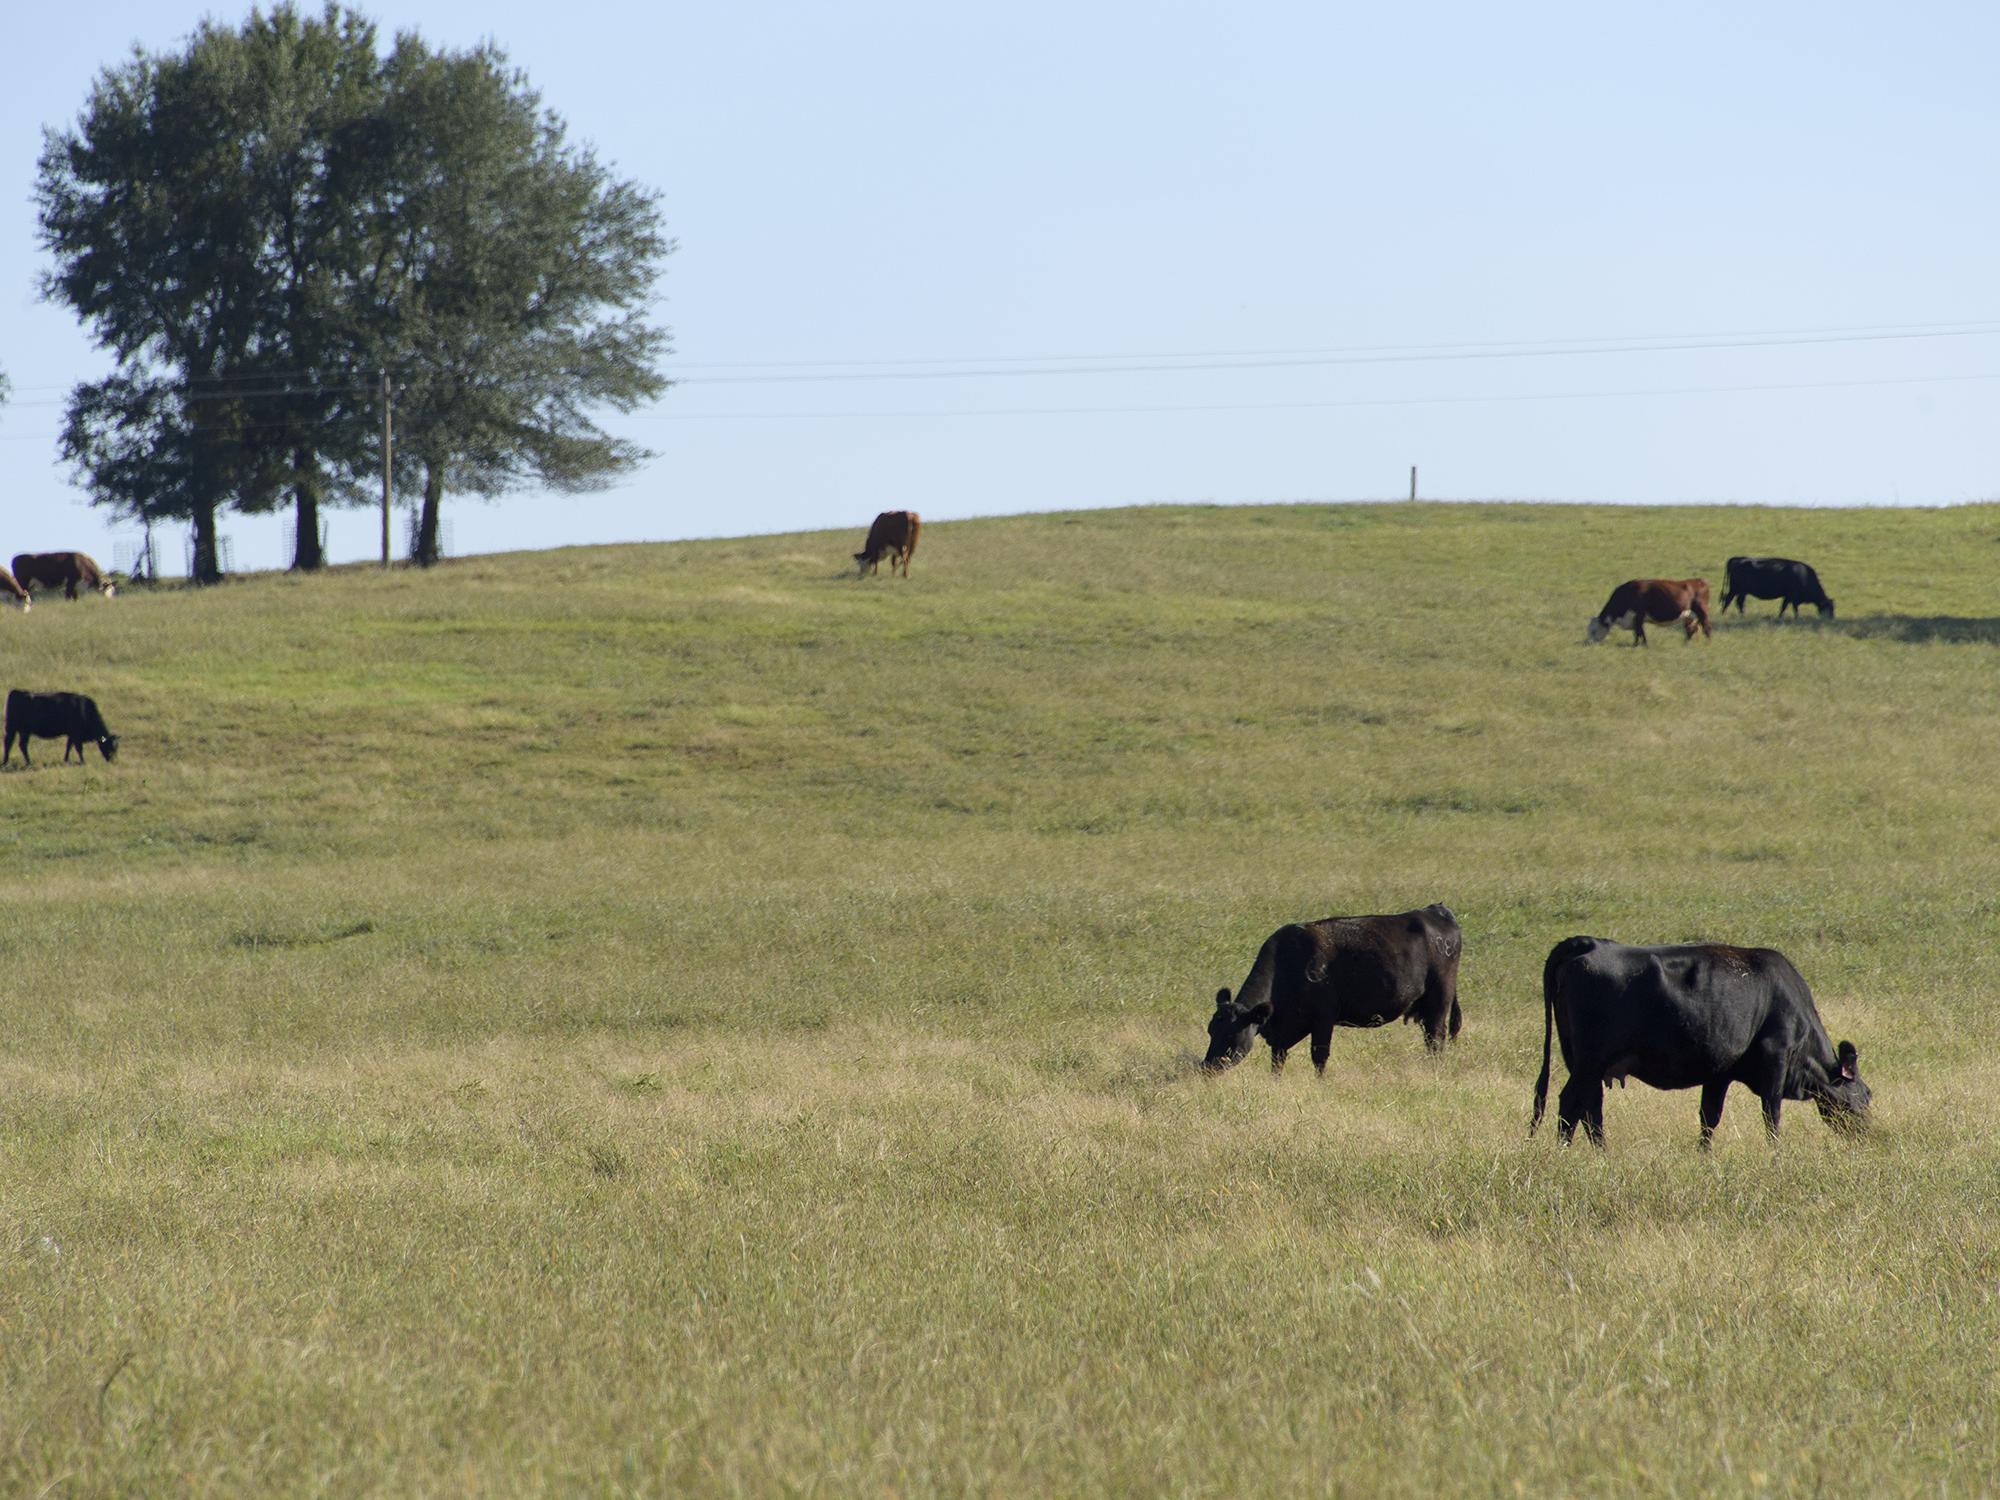 Cattle benefit from good pasture management that minimizes weed development during dry periods and helps pastures ahead of the dormant season. These beef cattle were photographed on the Mississippi State University H.H. Leveck Animal Research Center near Starkville on Sept. 29, 2016. (Photo by MSU Extension Service/Kevin Hudson)